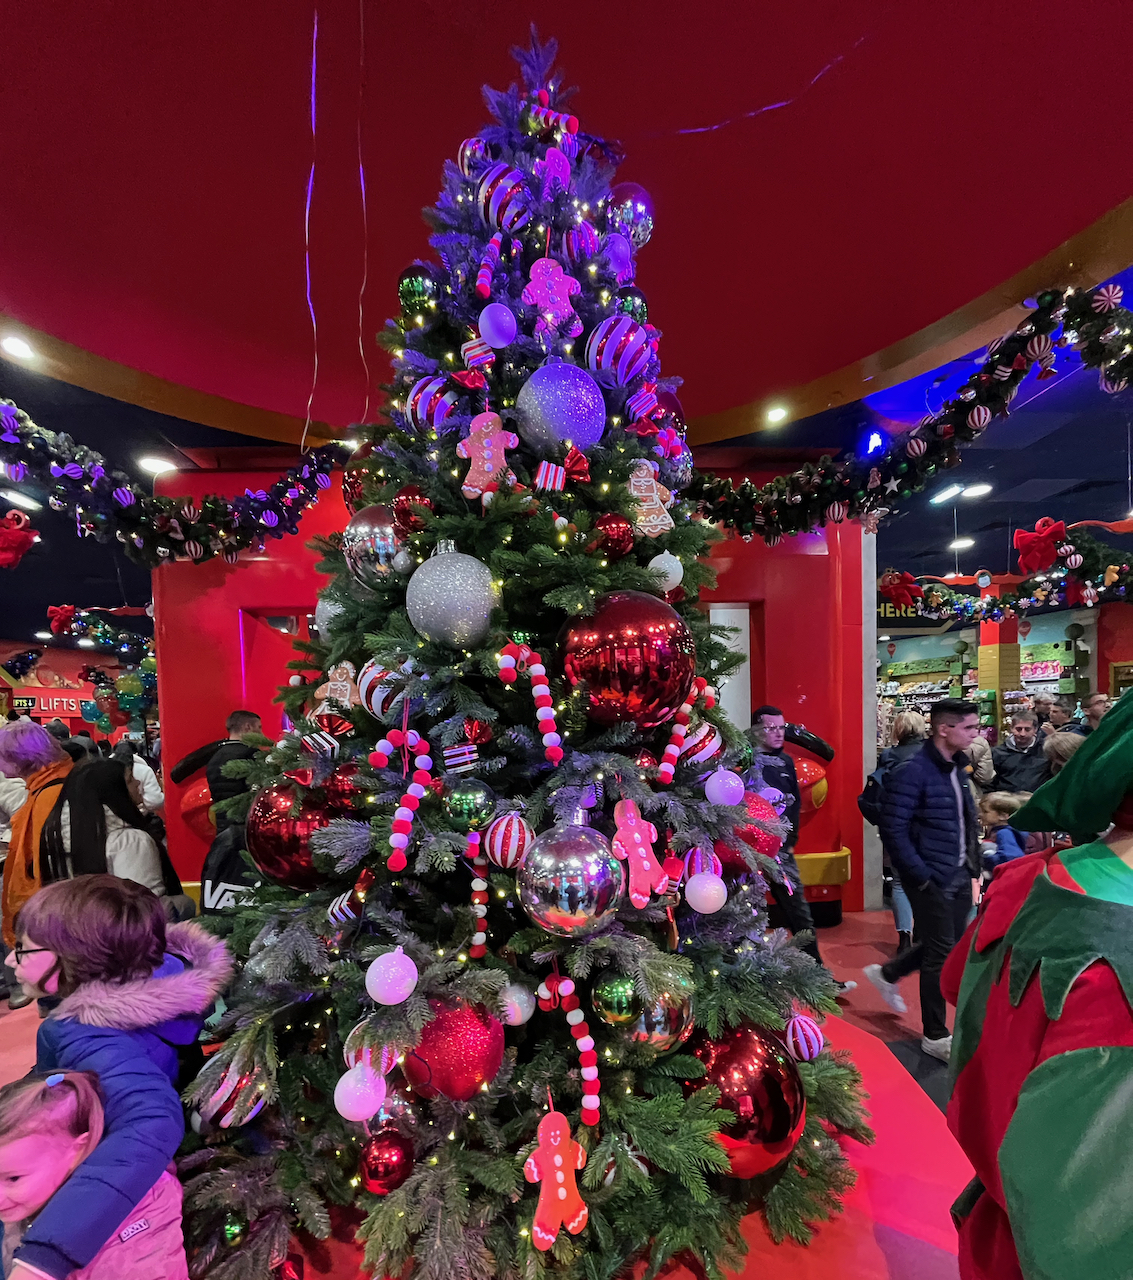 A large Christmas tree in Hamleys toy store, decorated with a variety of red, white and silver baubles, red and white striped candy canes, gingerbread men and lights.